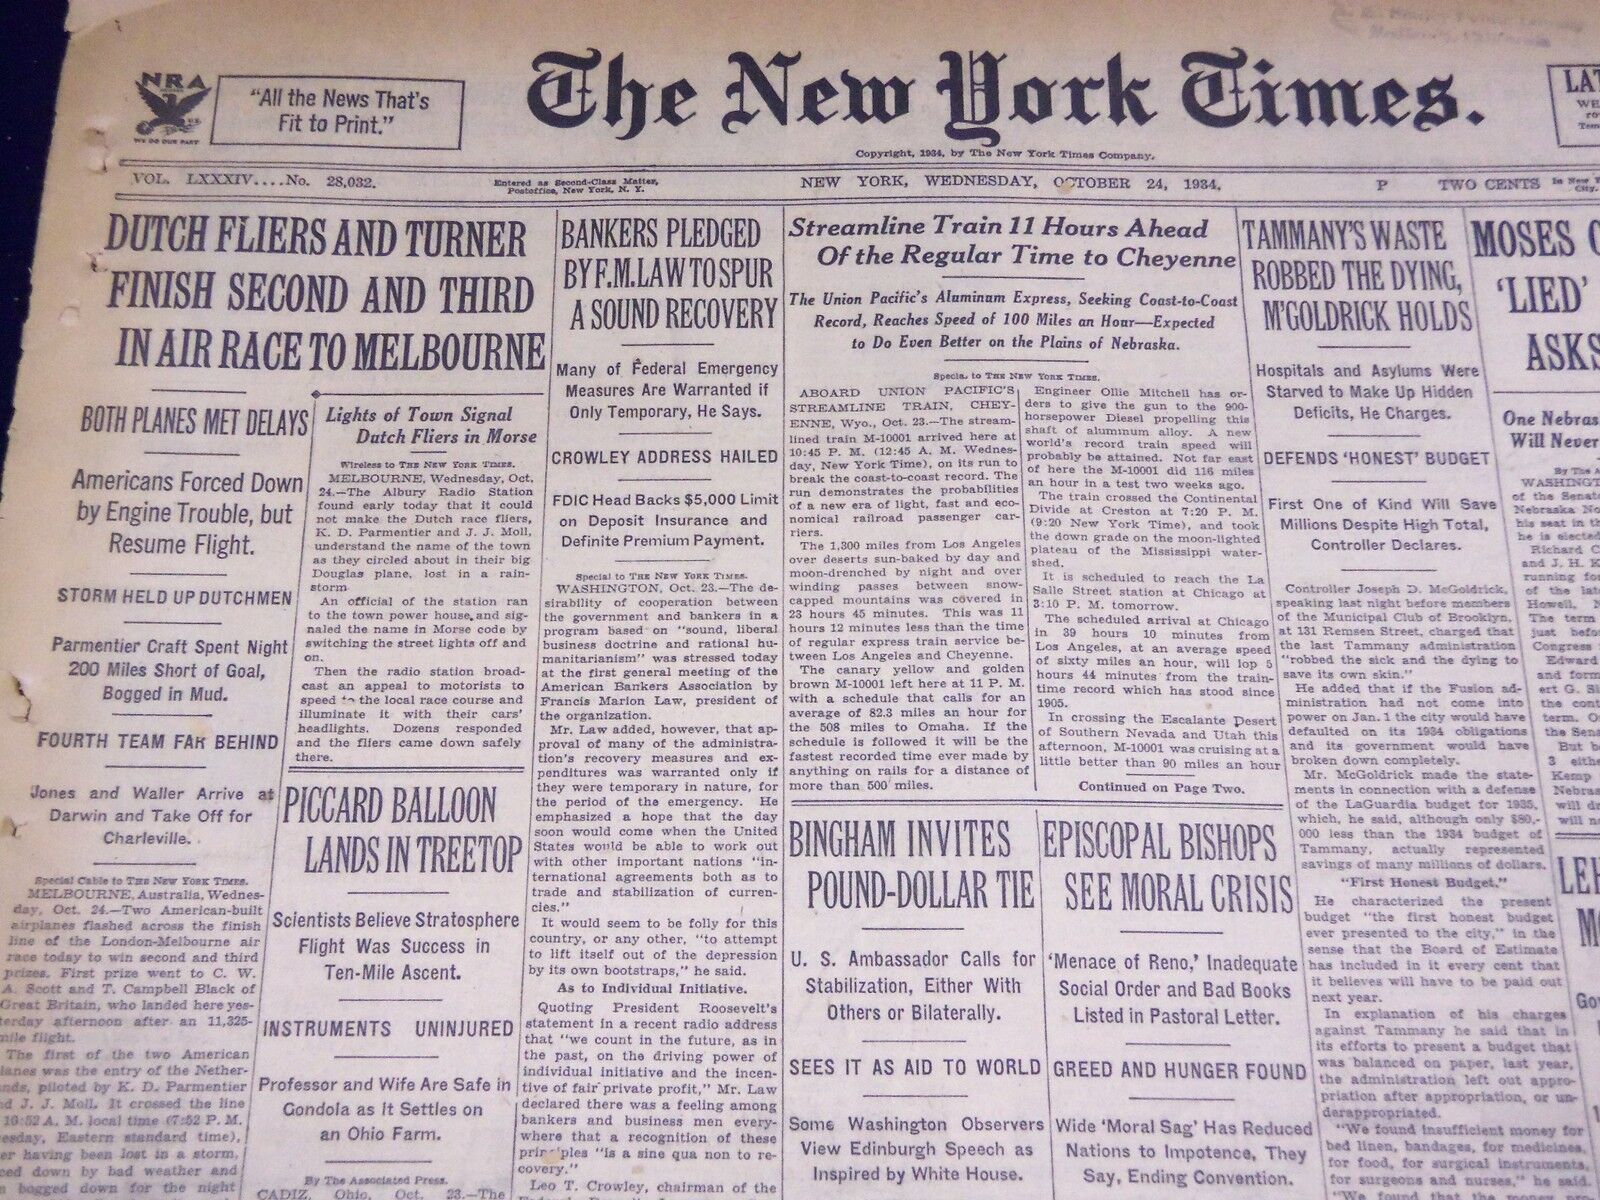 1934 OCT 24 NEW YORK TIMES - DUTCH FLIERS AND TURNER FINISH 2ND & 3RD - NT 1622